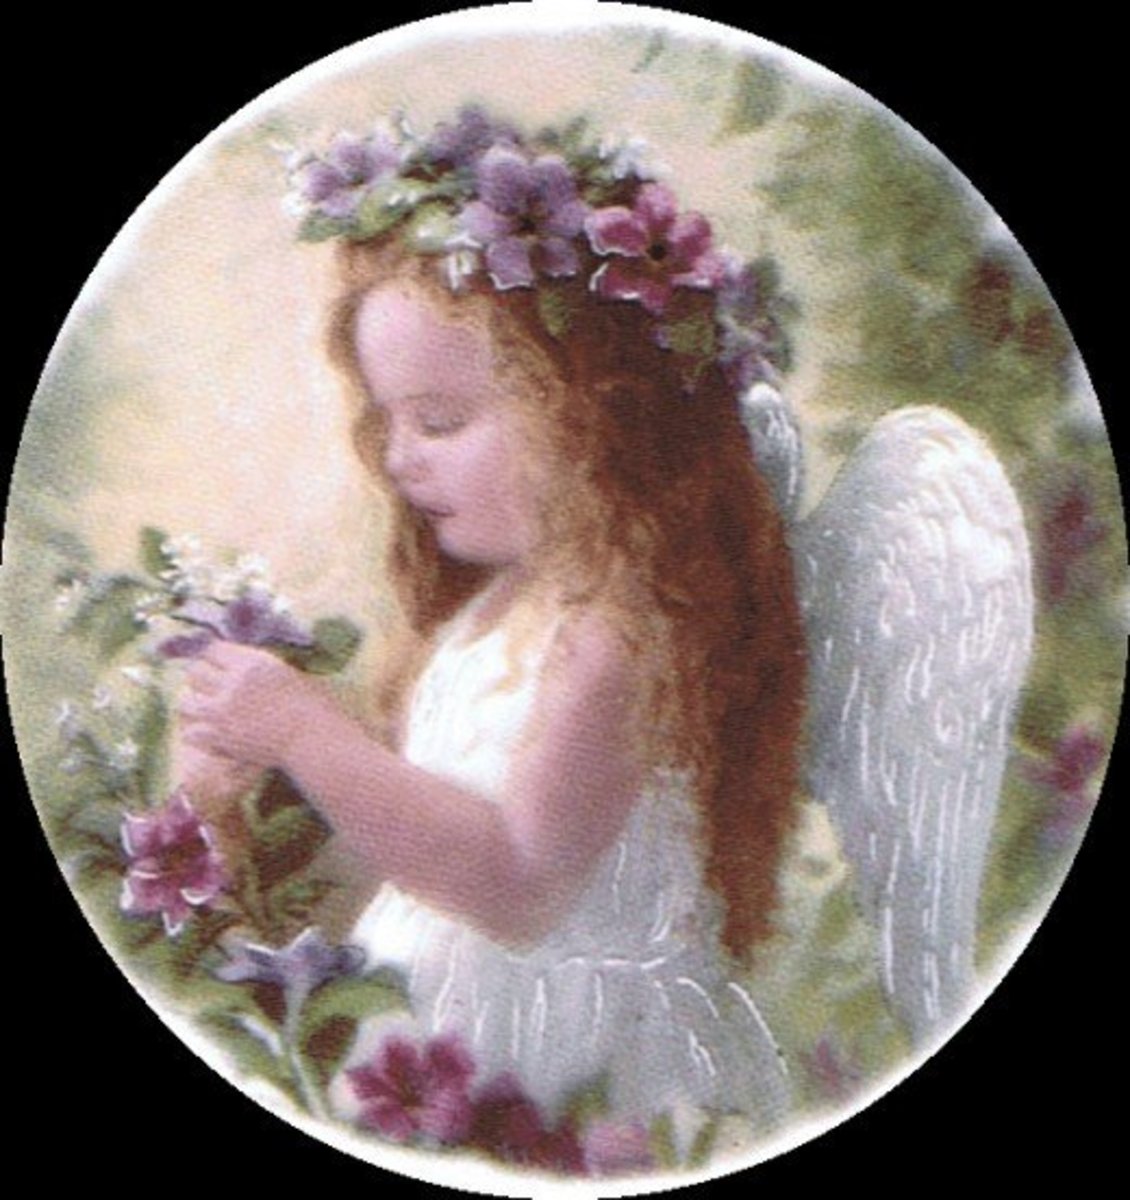 angels-as-guides-for-living